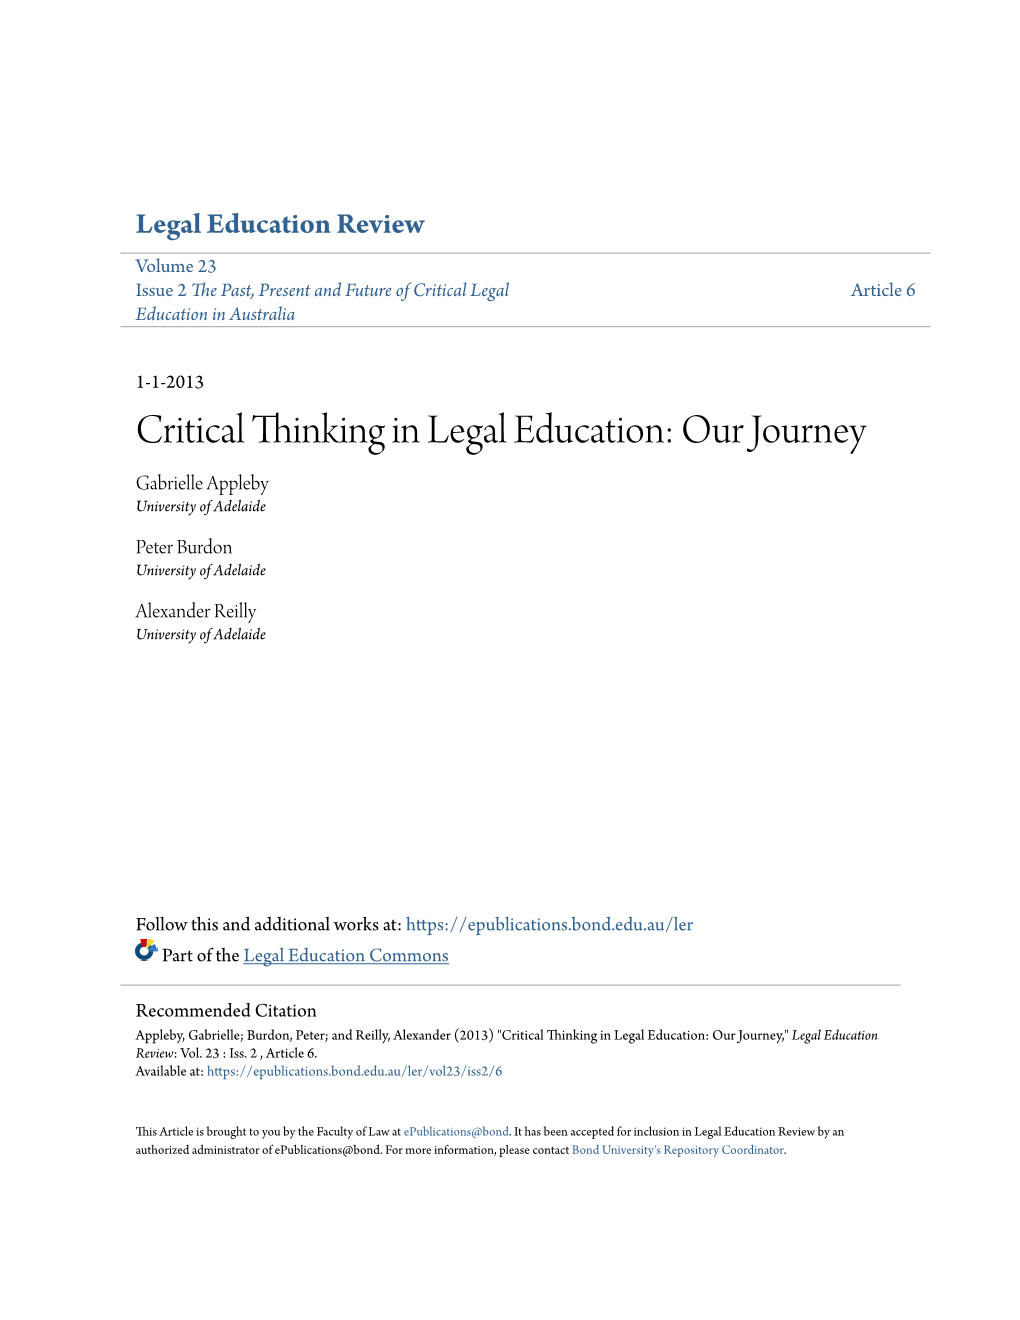 Critical Thinking in Legal Education: Our Journey Gabrielle Appleby University of Adelaide